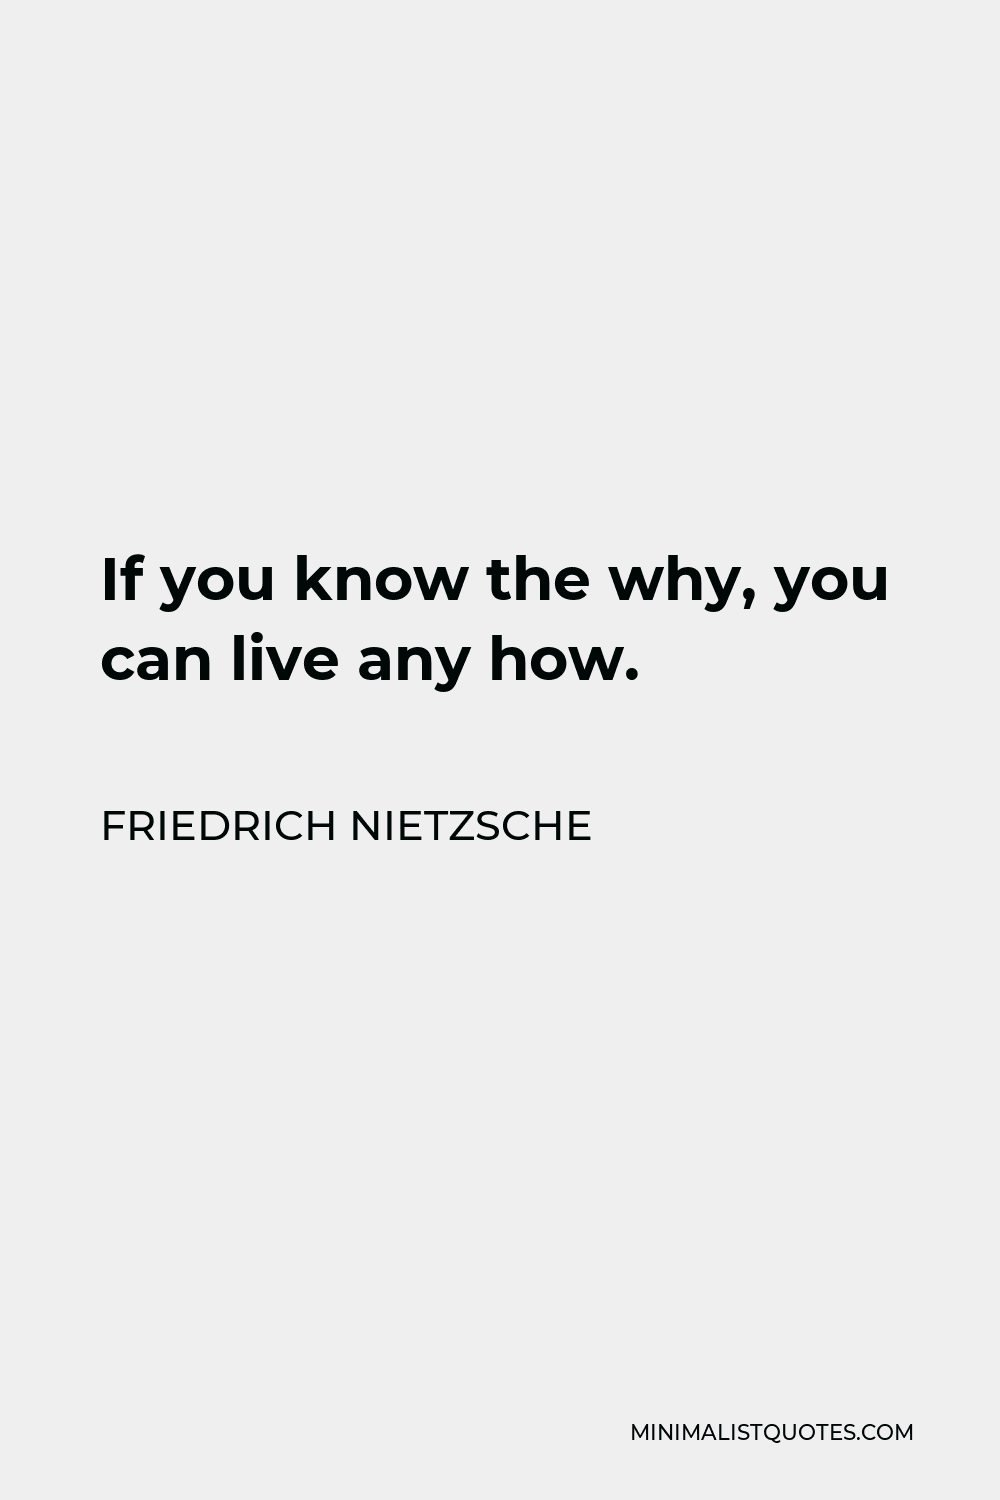 Friedrich Nietzsche Quote - If you know the why, you can live any how.